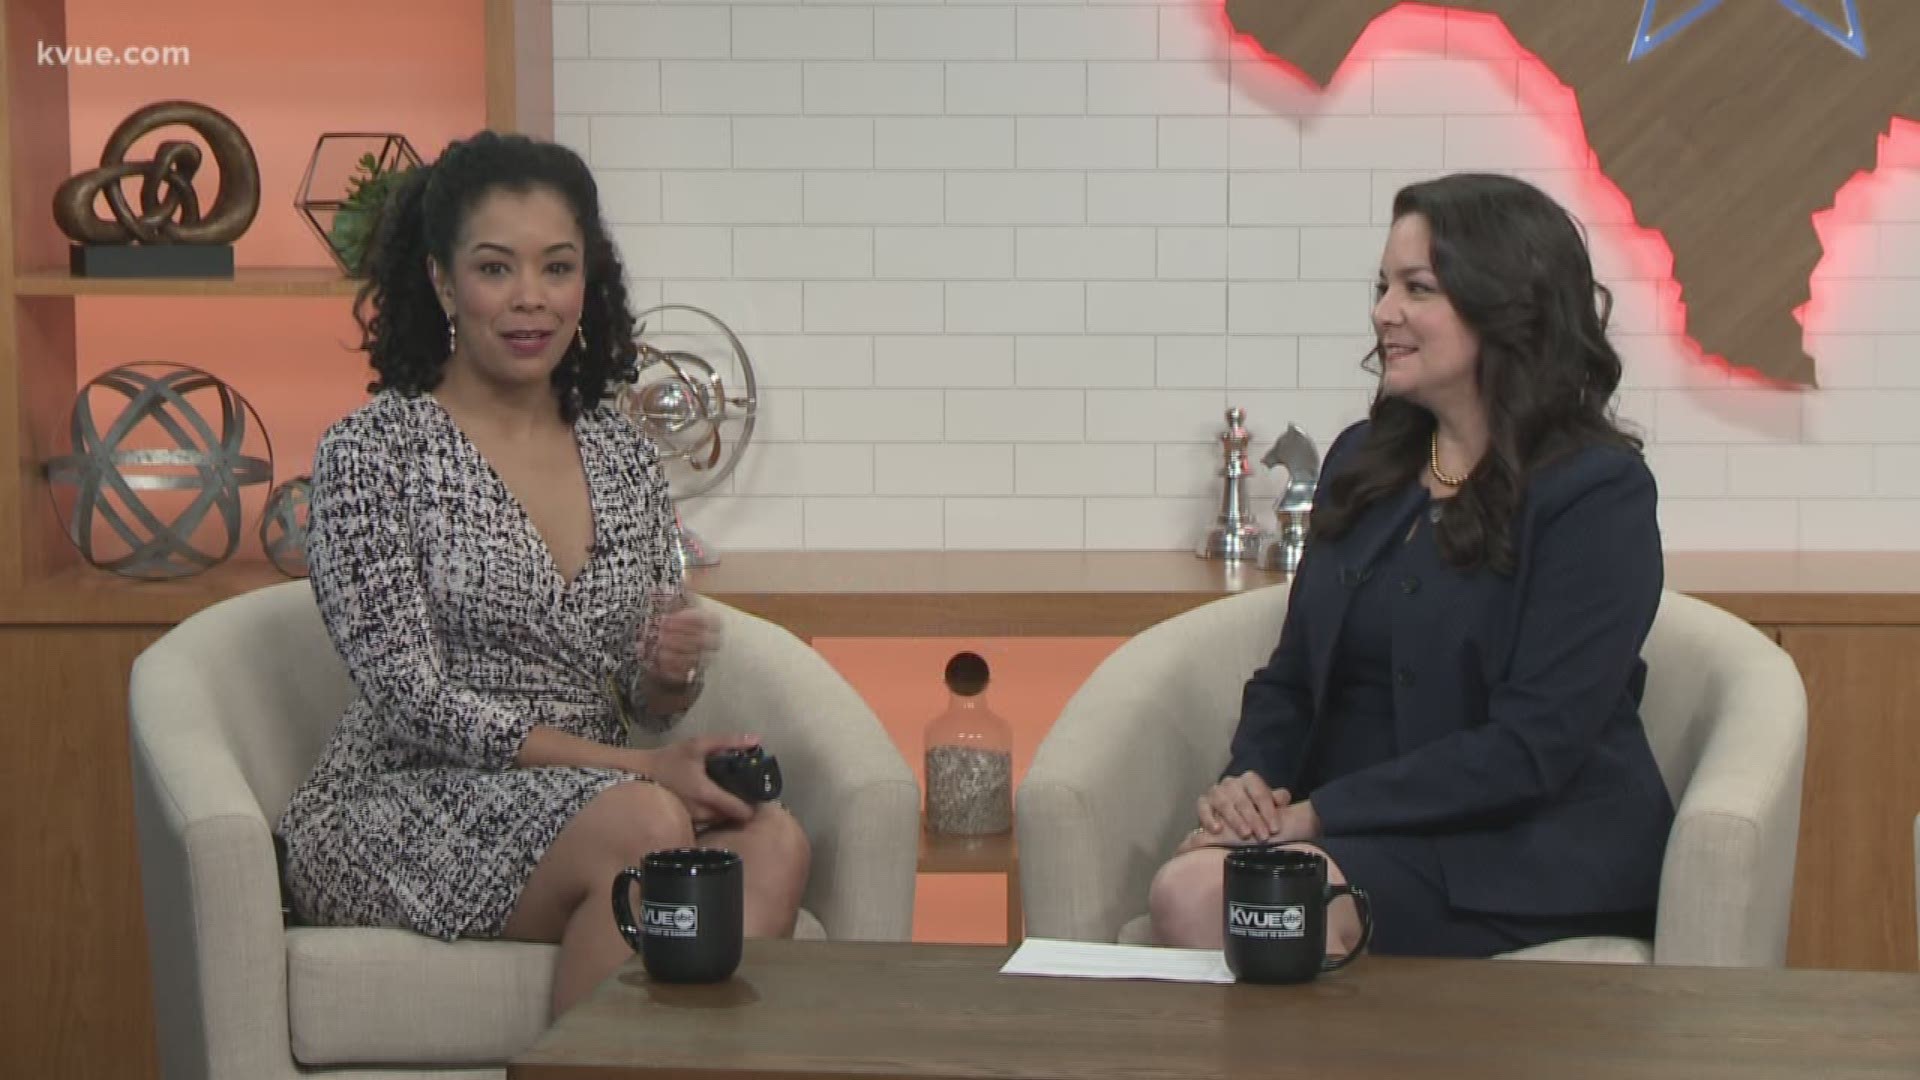 Adriana Cruz, who is the president of the Greater San Marcos Partnership, stopped by KVUE to talk about the 2019 Greater San Marcos Economic Outlook.